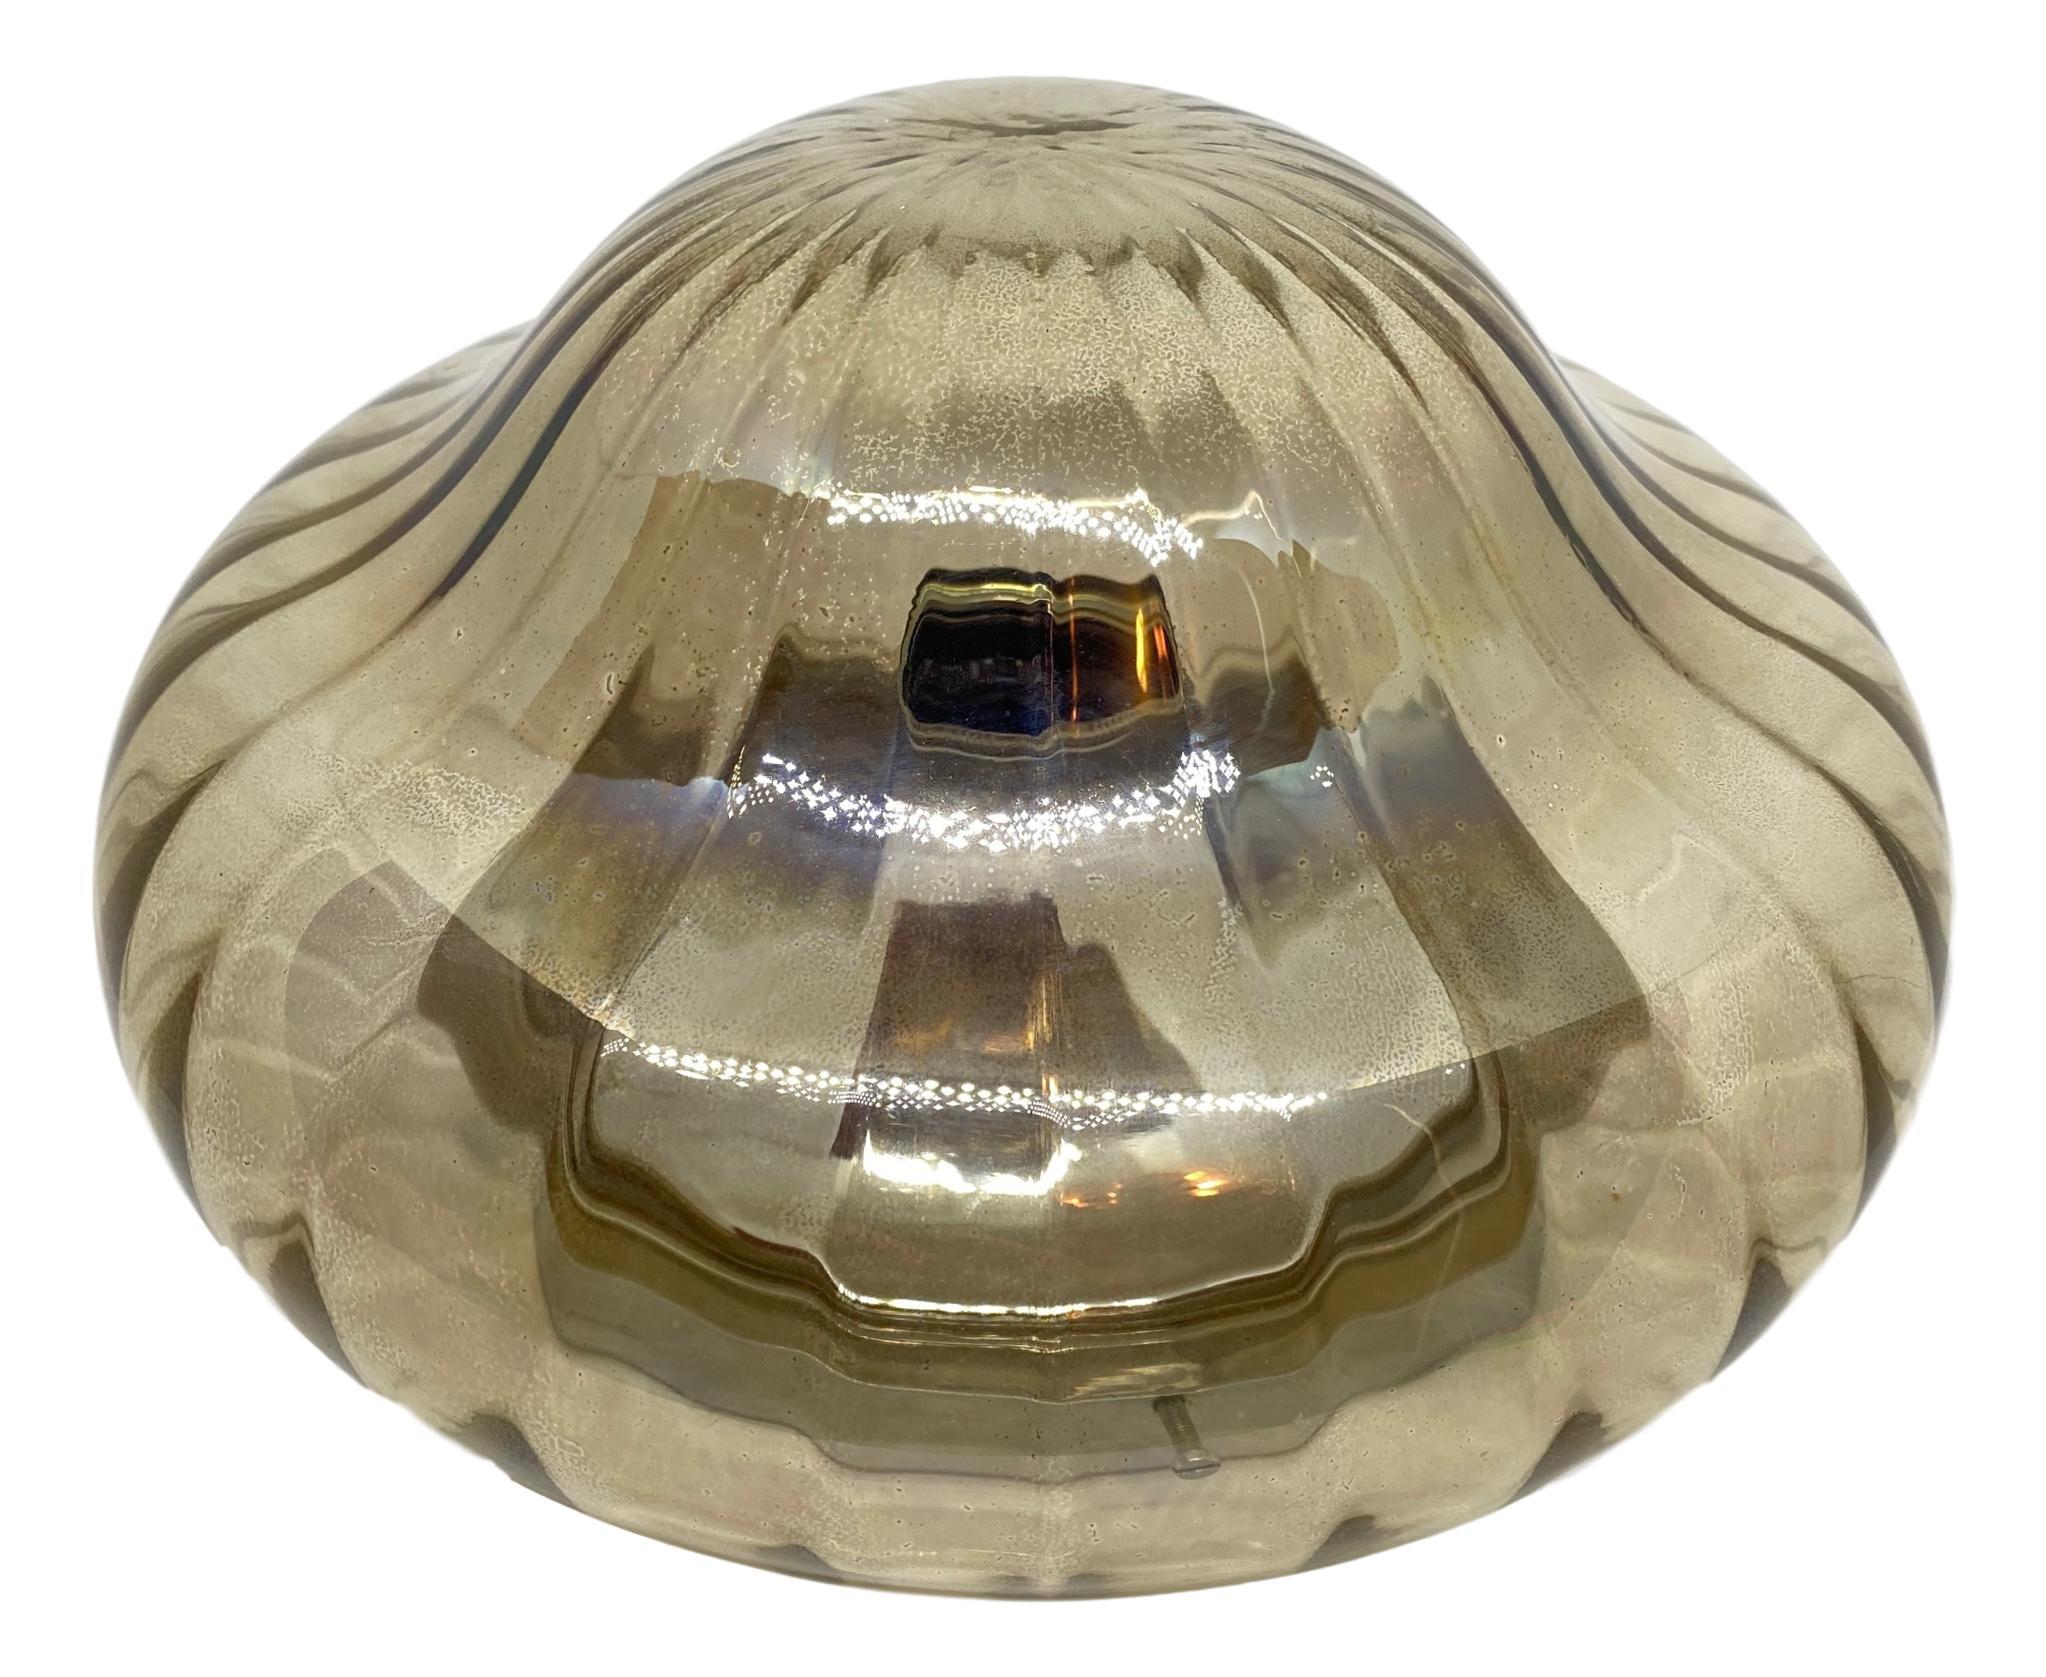 A petite gorgeous glass flush mount. It can be used also as a sconce. The light fixture requires one European E27 bulb, up to 60 watts. Iridescent glass, mounted on a chrome base.